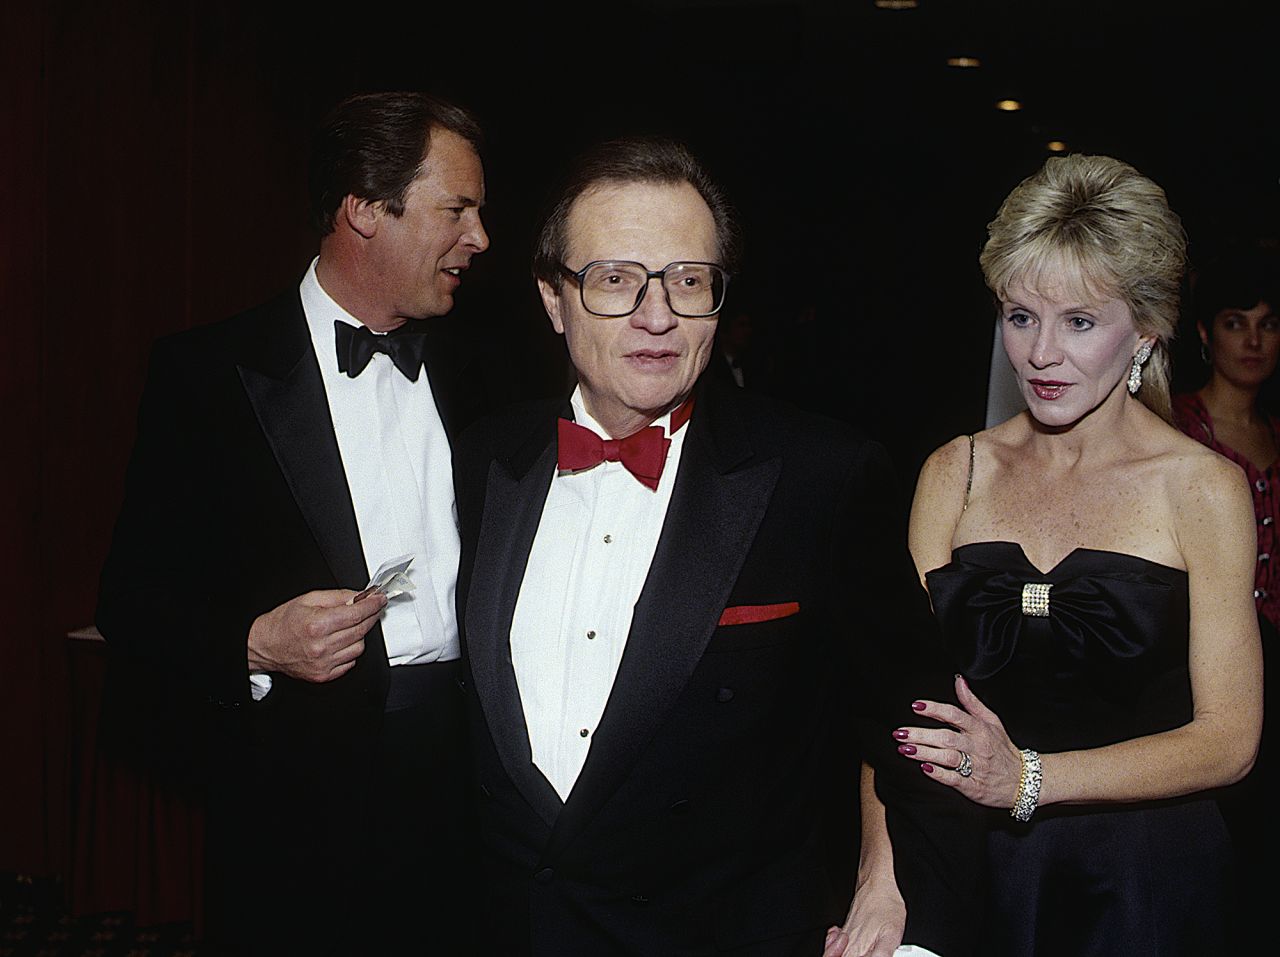 King and his wife, Julie, leave the White House Correspondents' Dinner in 1990. At left is ABC News anchorman Peter Jennings.